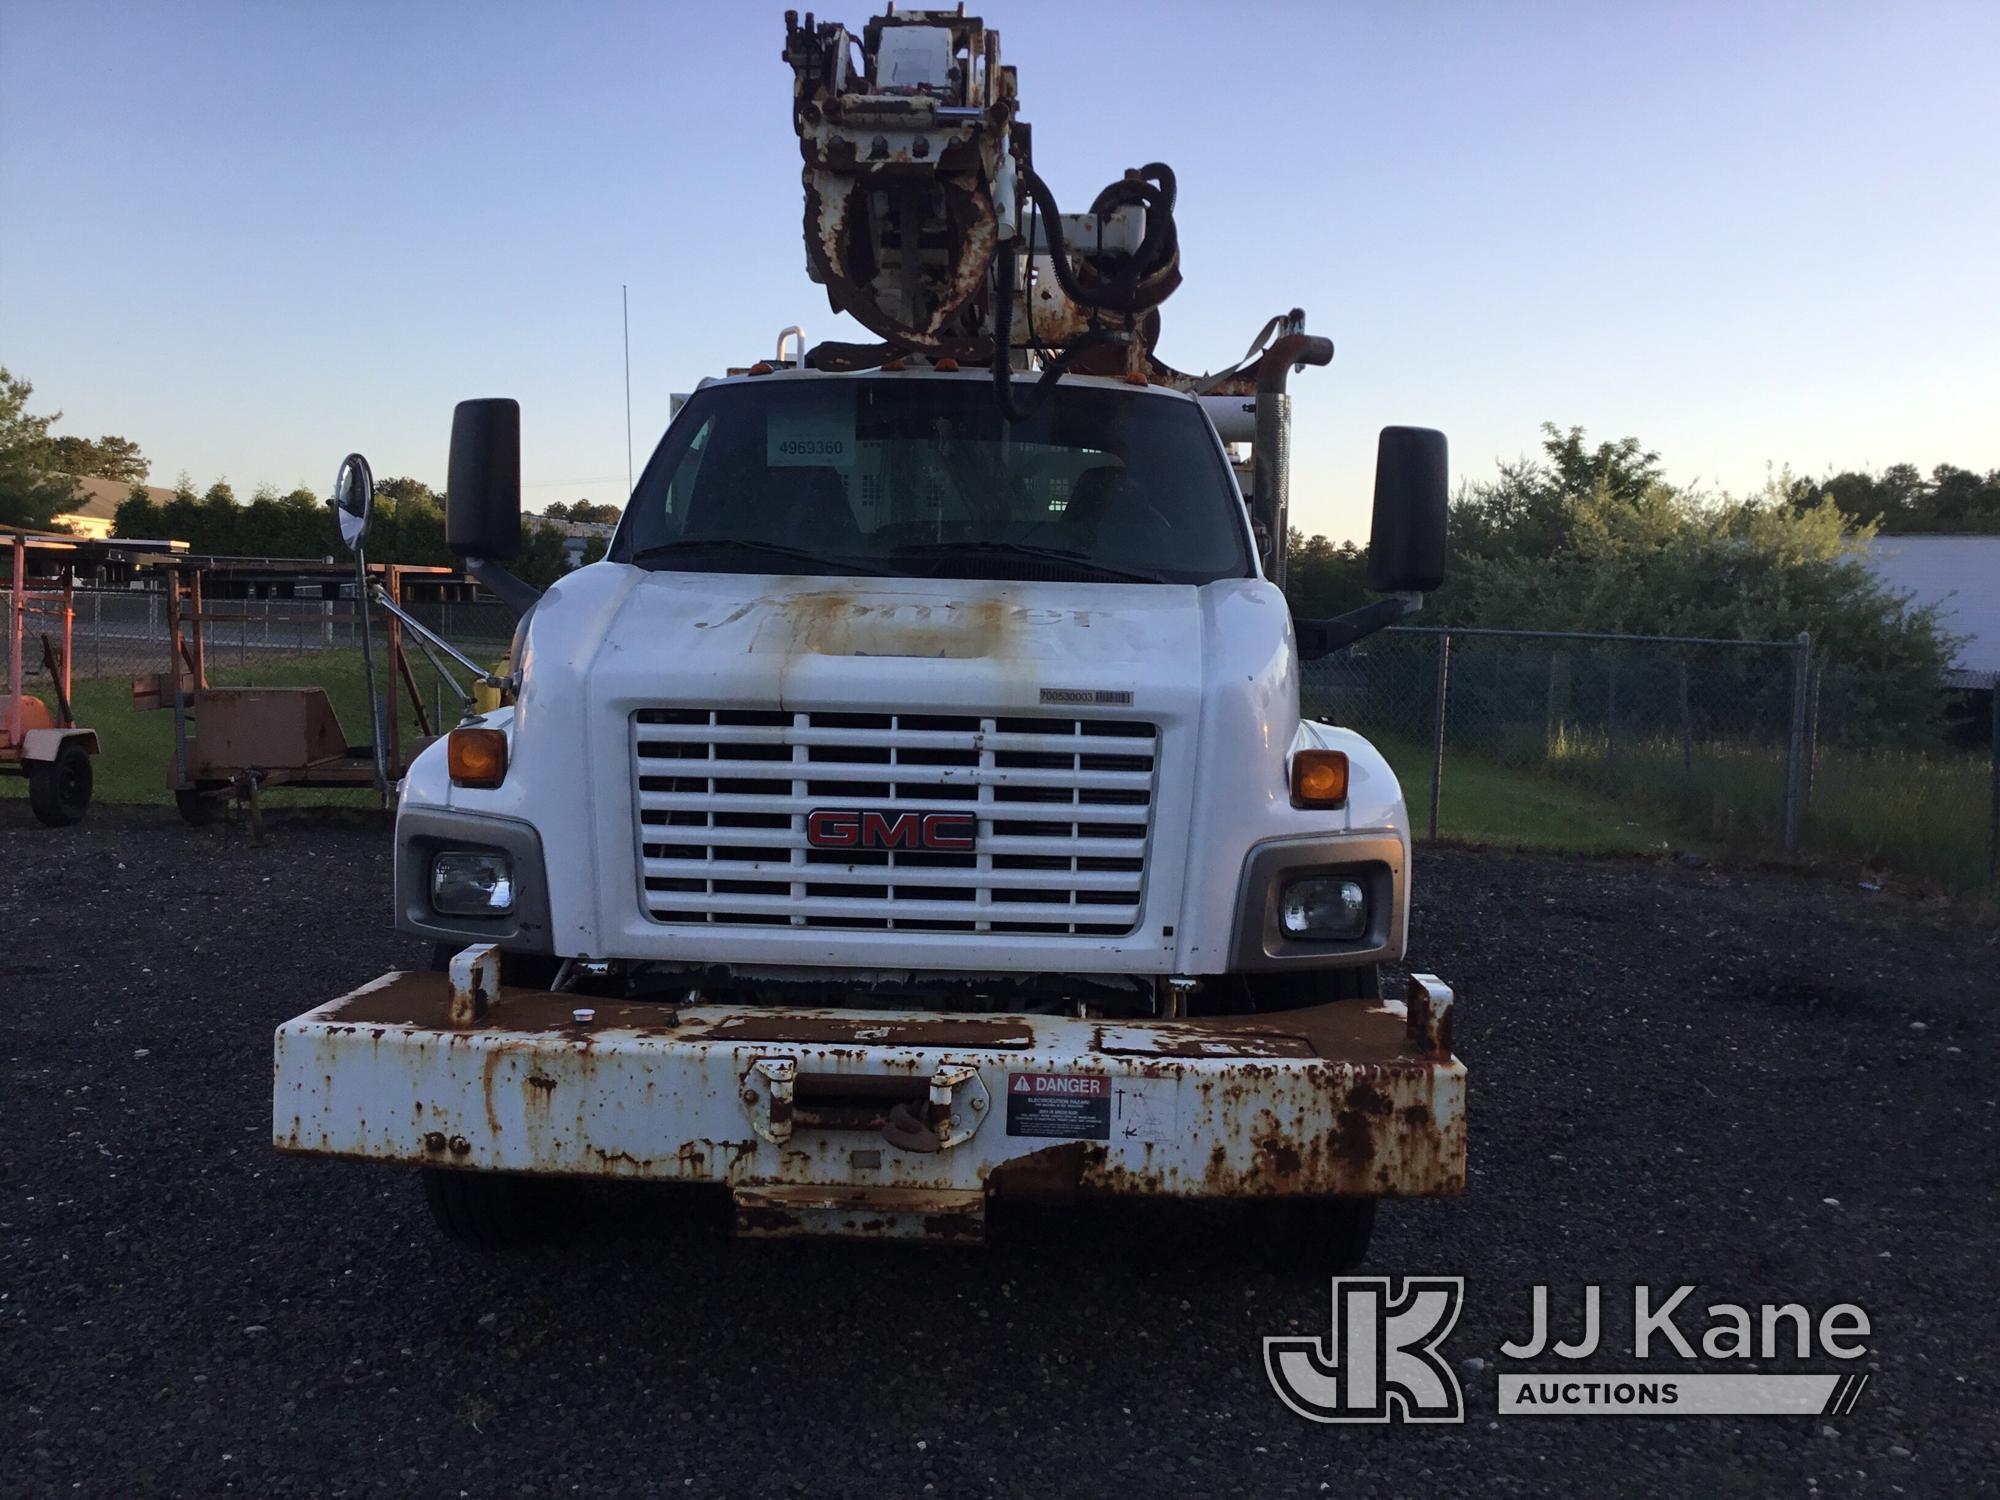 (Berlin Township, NJ) Altec DL45-BR, Digger Derrick rear mounted on 2005 GMC C8500 Flatbed/Utility T